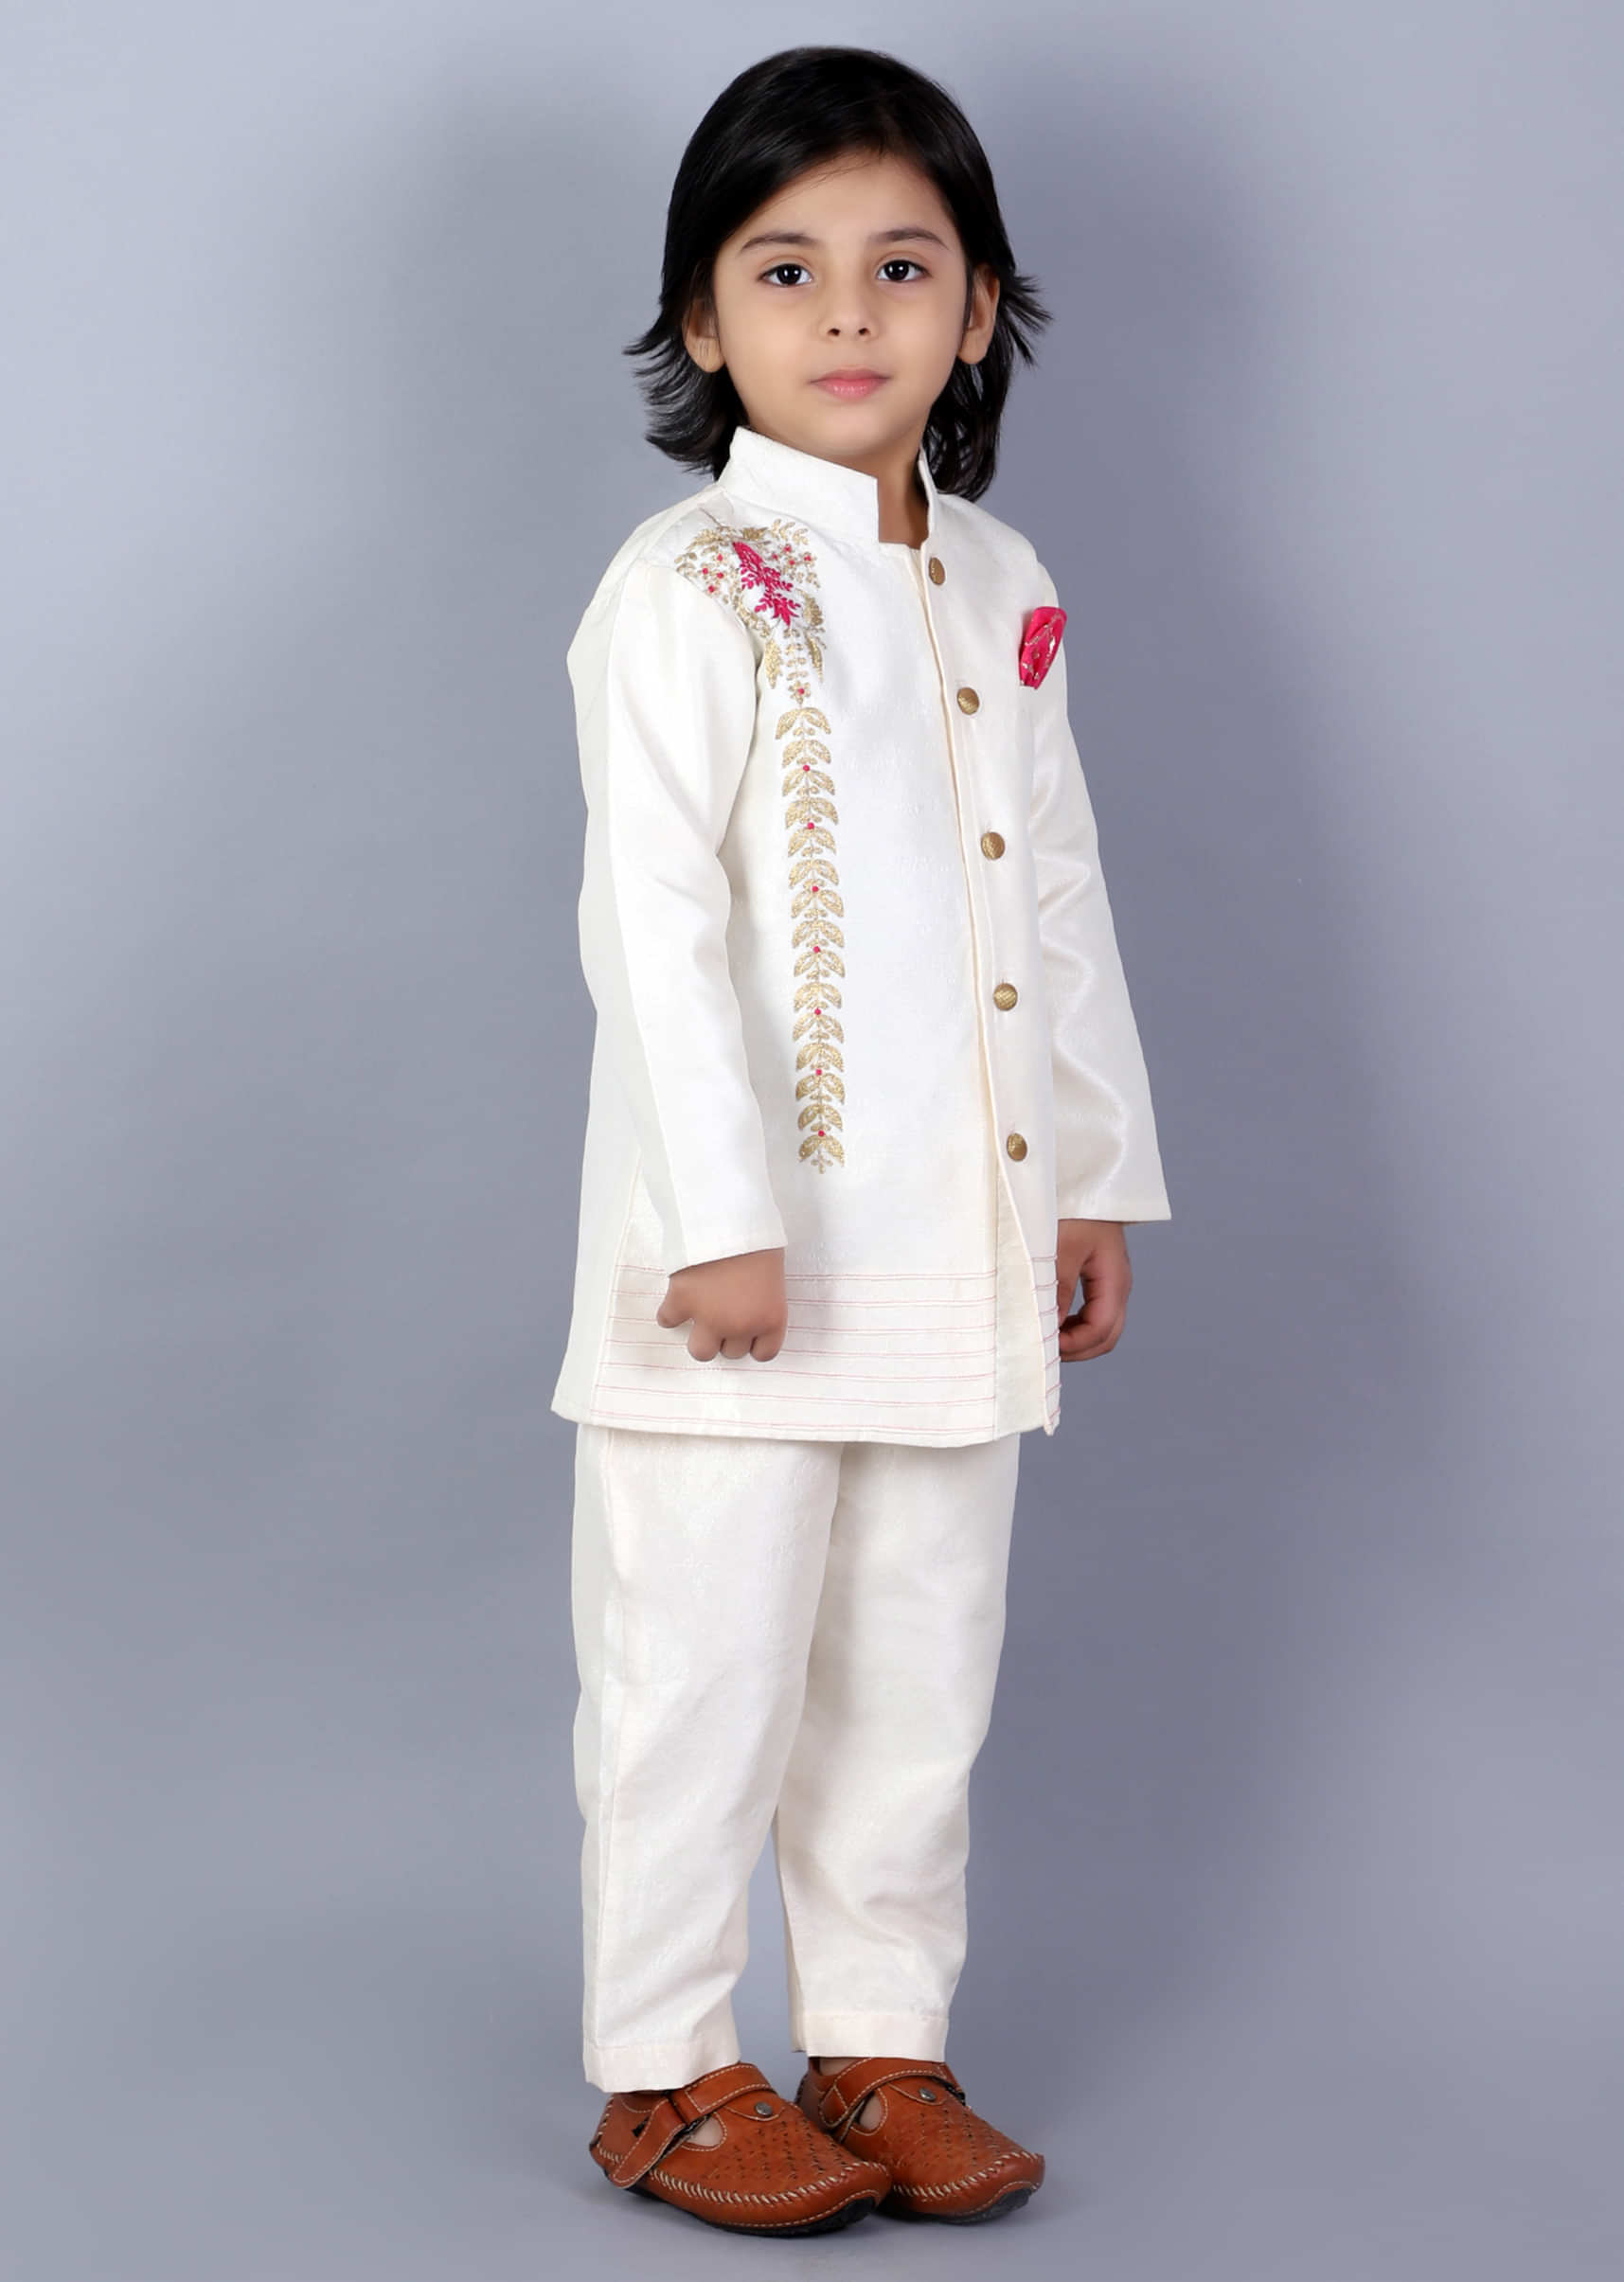 Kalki Boys Off White Bandhgala Set In Raw Silk With Embroidery Detailing And Pink Pocket Square